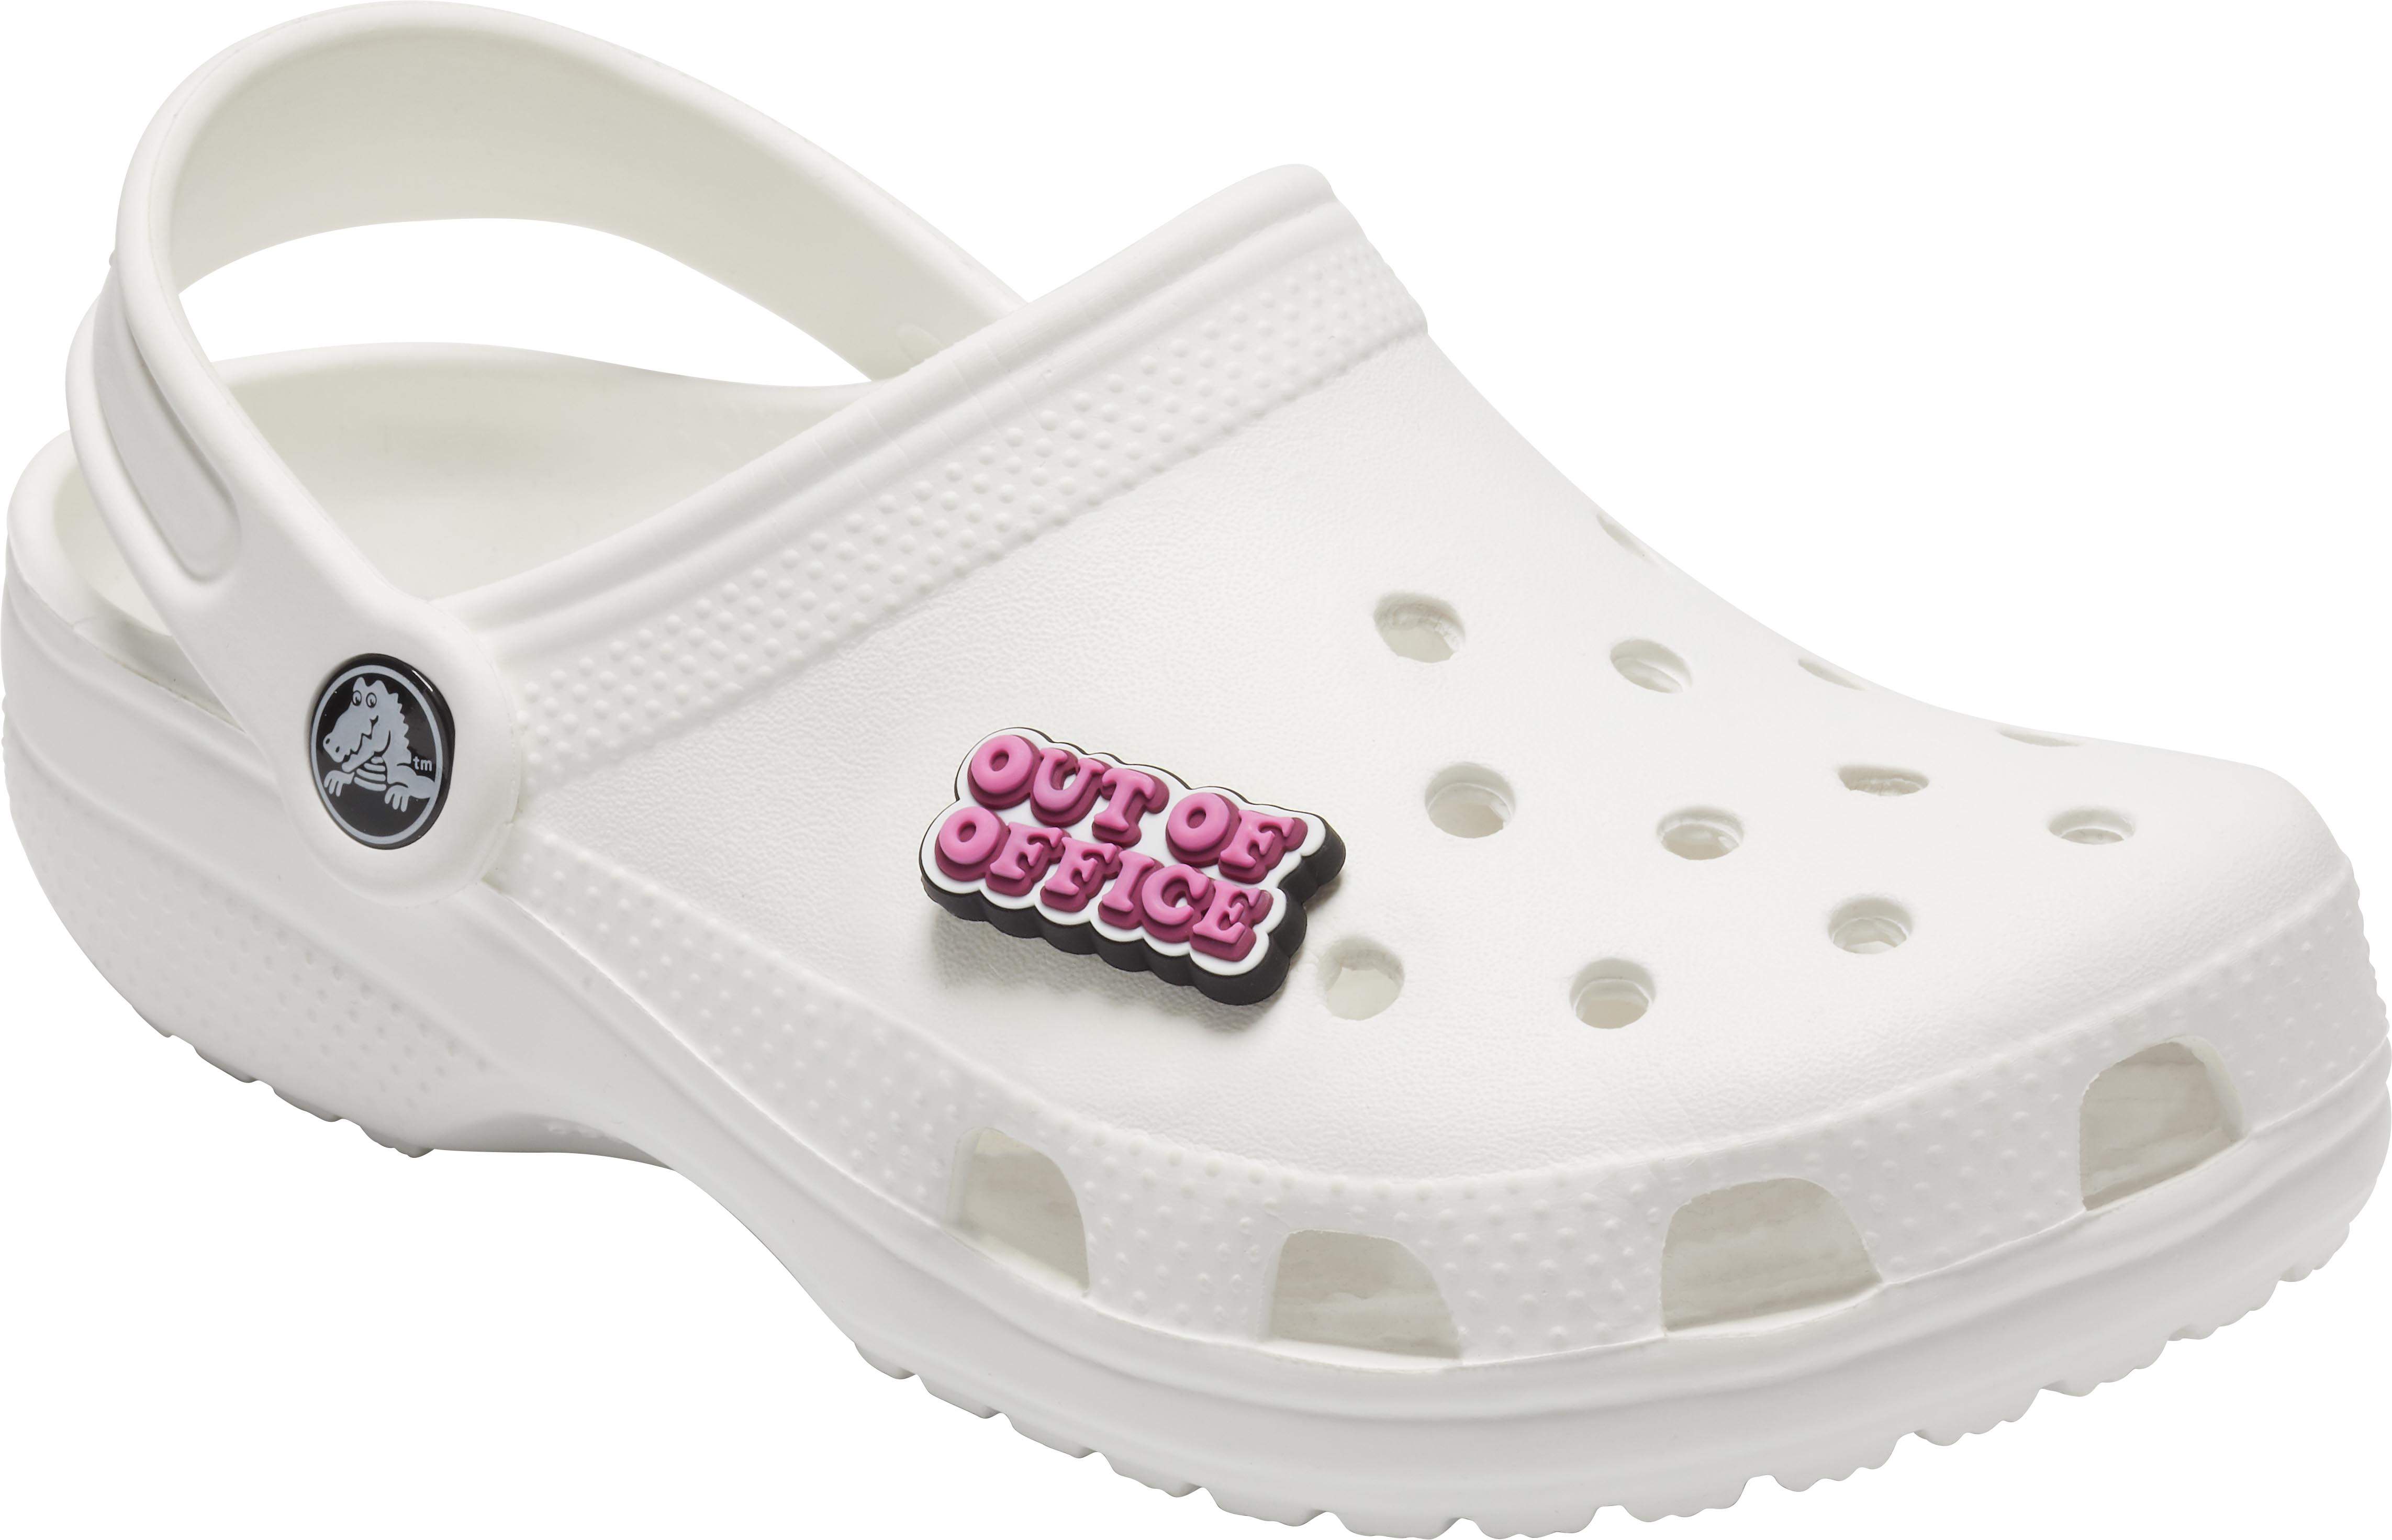 Out of Office Jibbitz Shoe Charm - Crocs